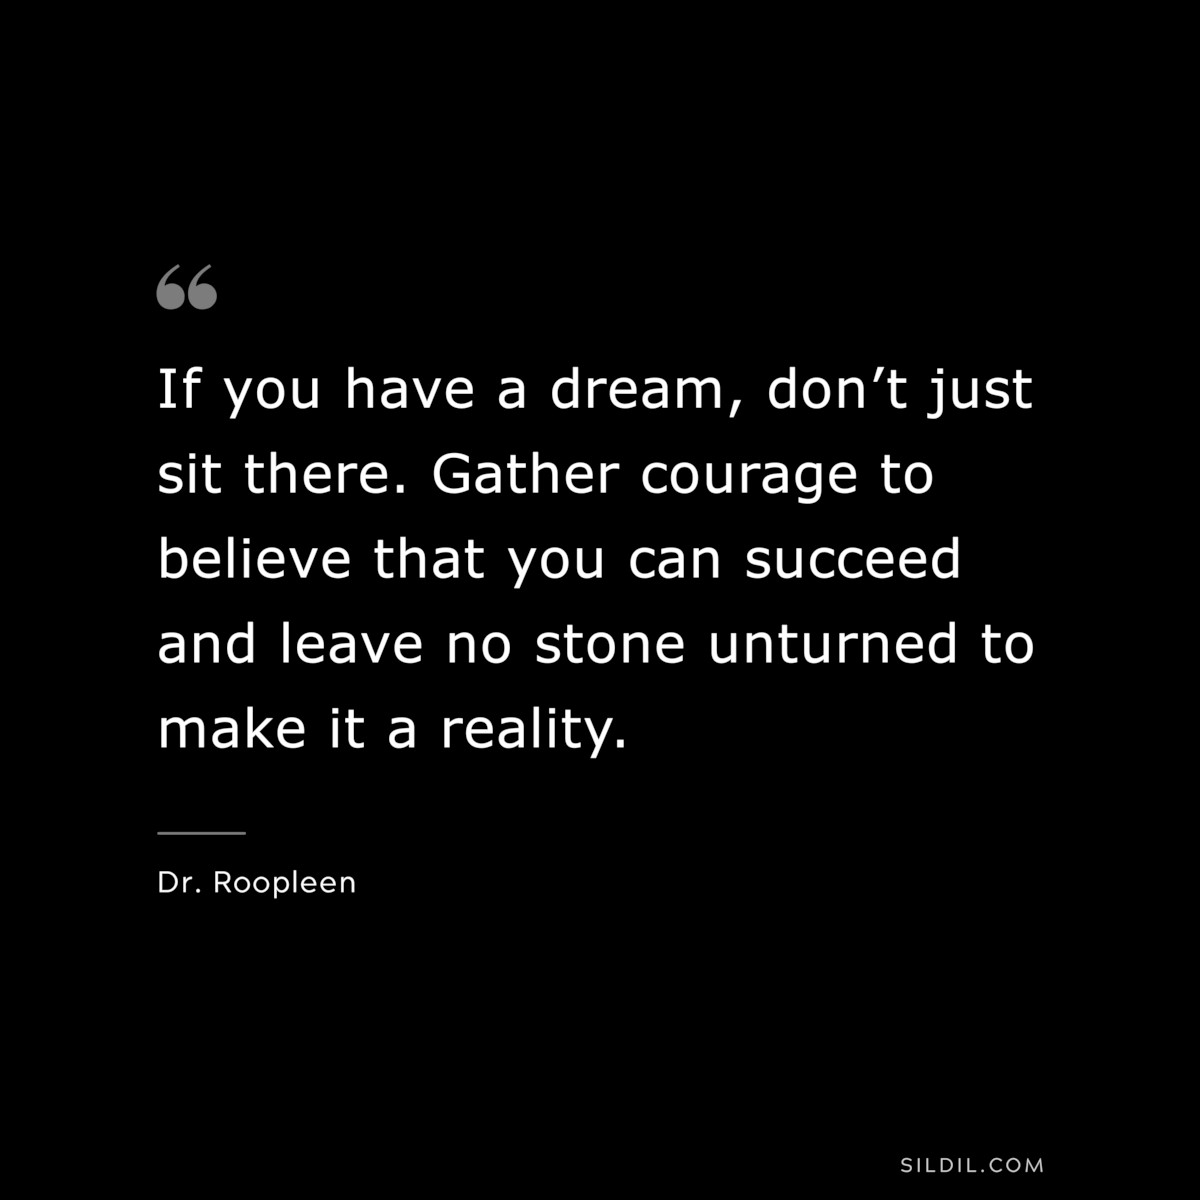 If you have a dream, don’t just sit there. Gather courage to believe that you can succeed and leave no stone unturned to make it a reality. ― Dr. Roopleen